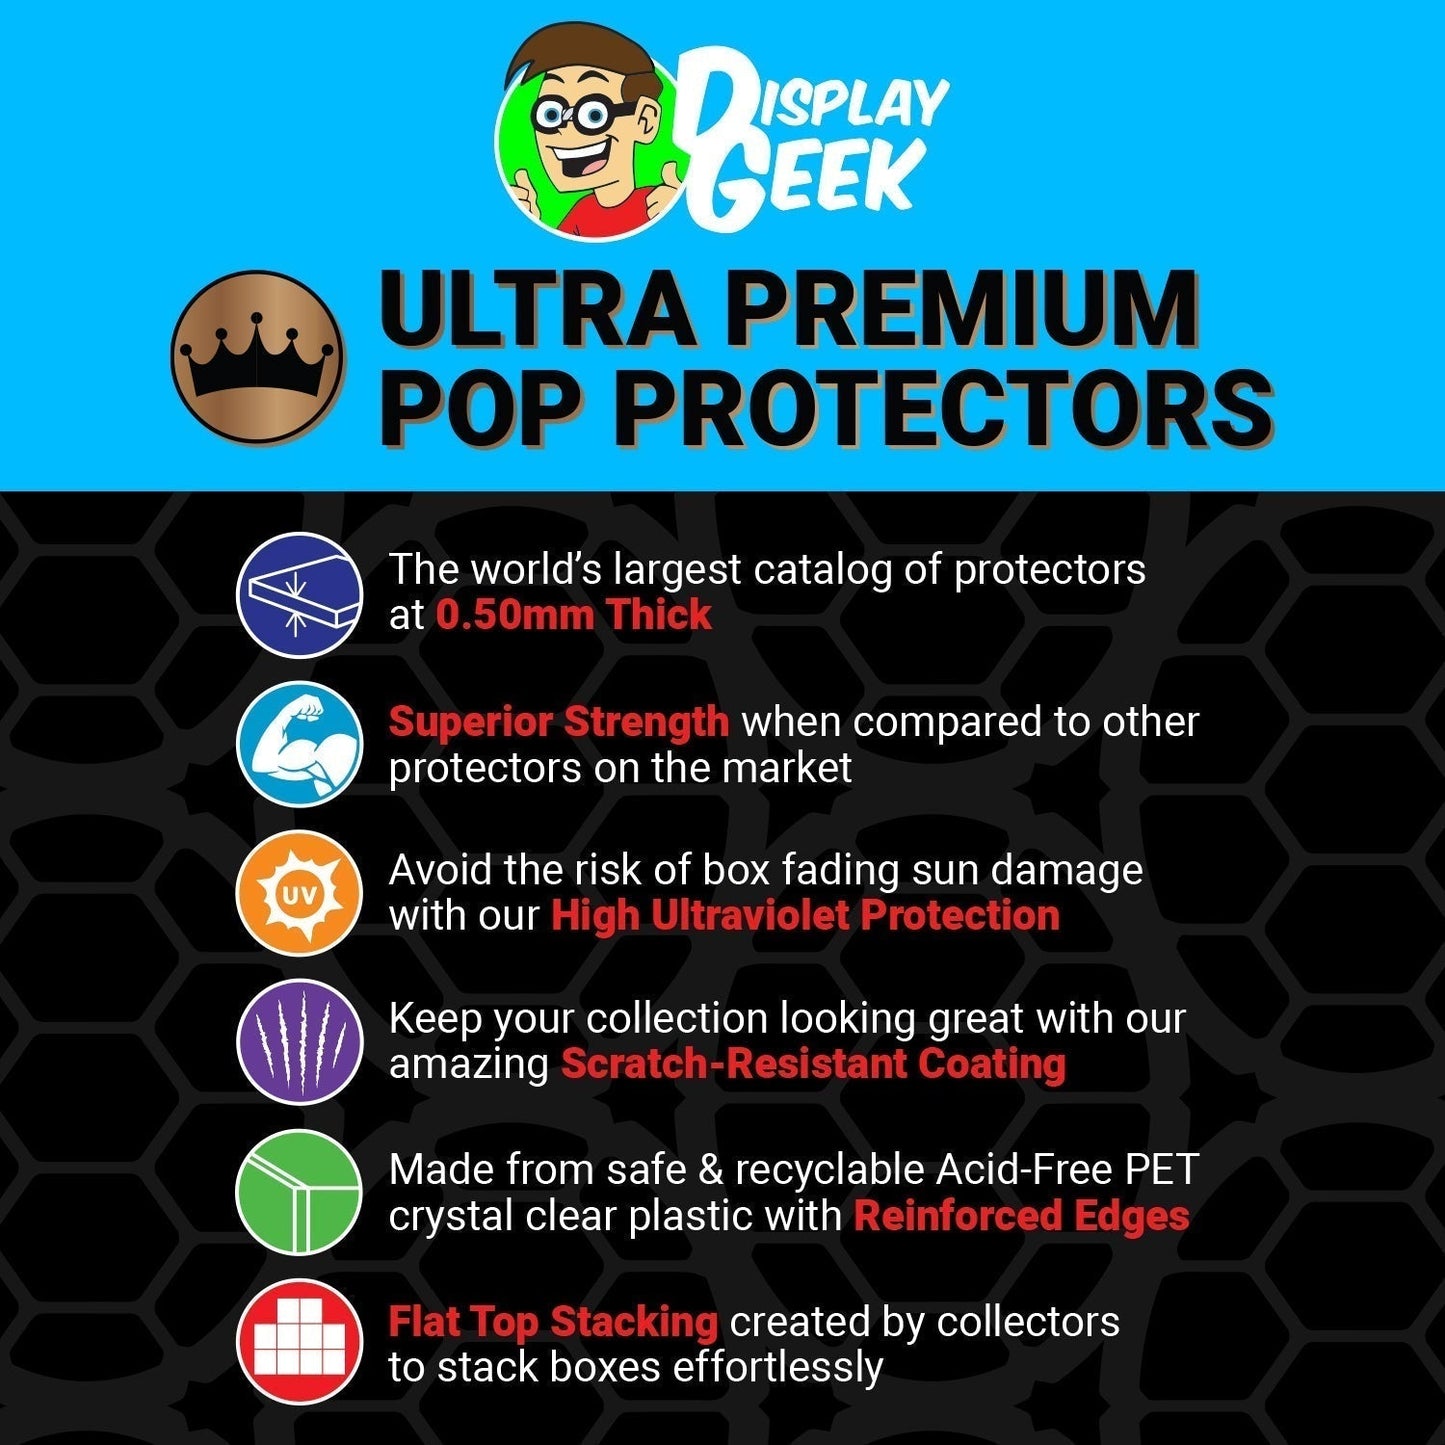 Pop Protector for 6 inch Obelisk the Tormentor #757 Super Funko Pop - PPG Pop Protector Guide Search Created by Display Geek